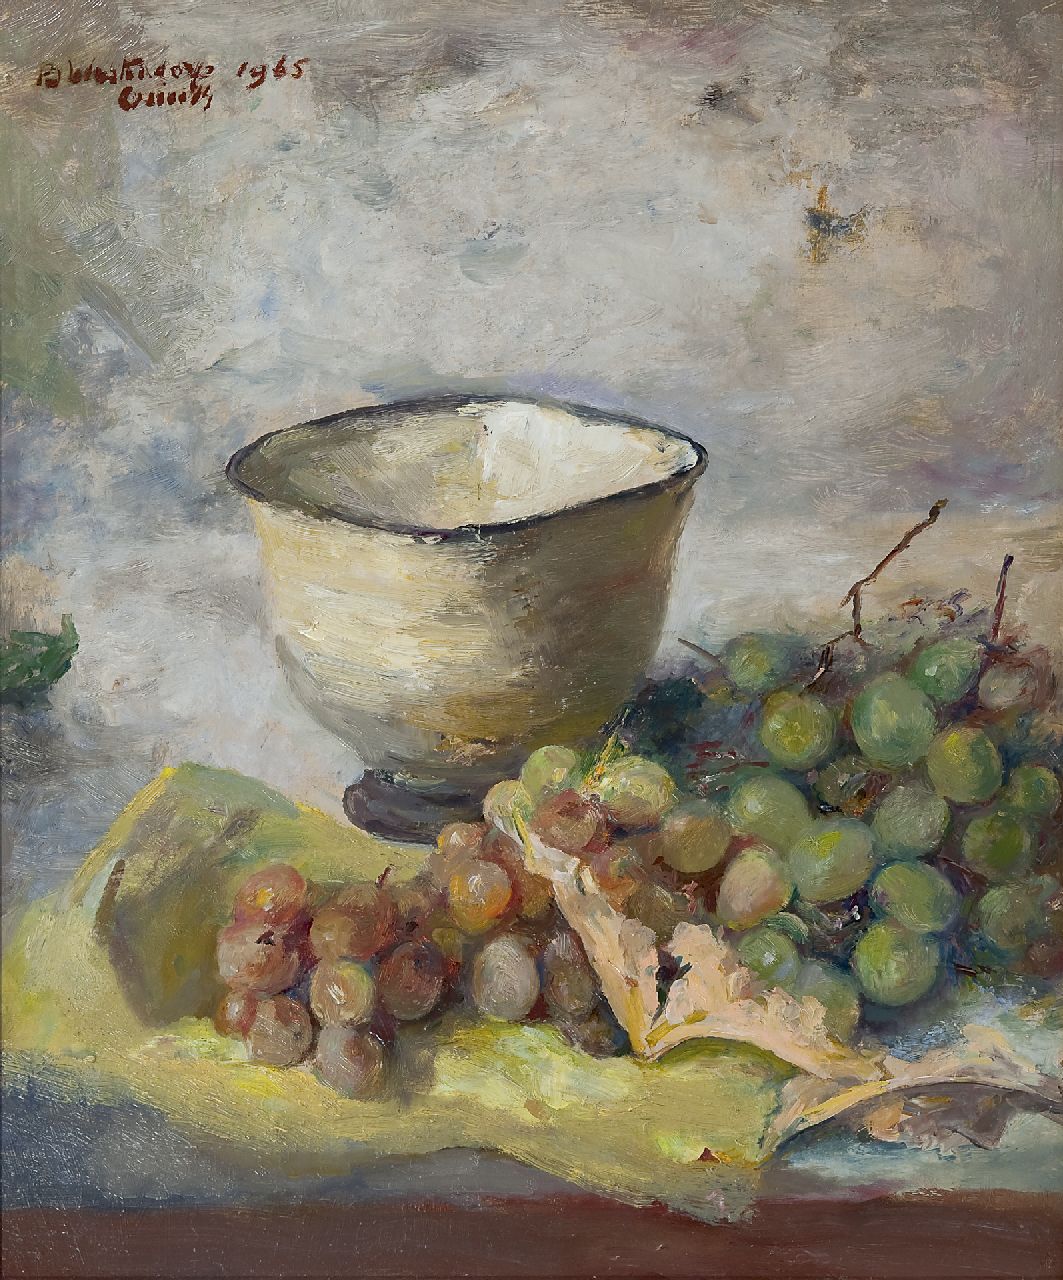 Westendorp-Osieck J.E.  | Johanna Elisabeth 'Betsy' Westendorp-Osieck, A still life with grapes and a bowl, oil on painter's board 45.9 x 37.9 cm, signed u.l. and dated 1965